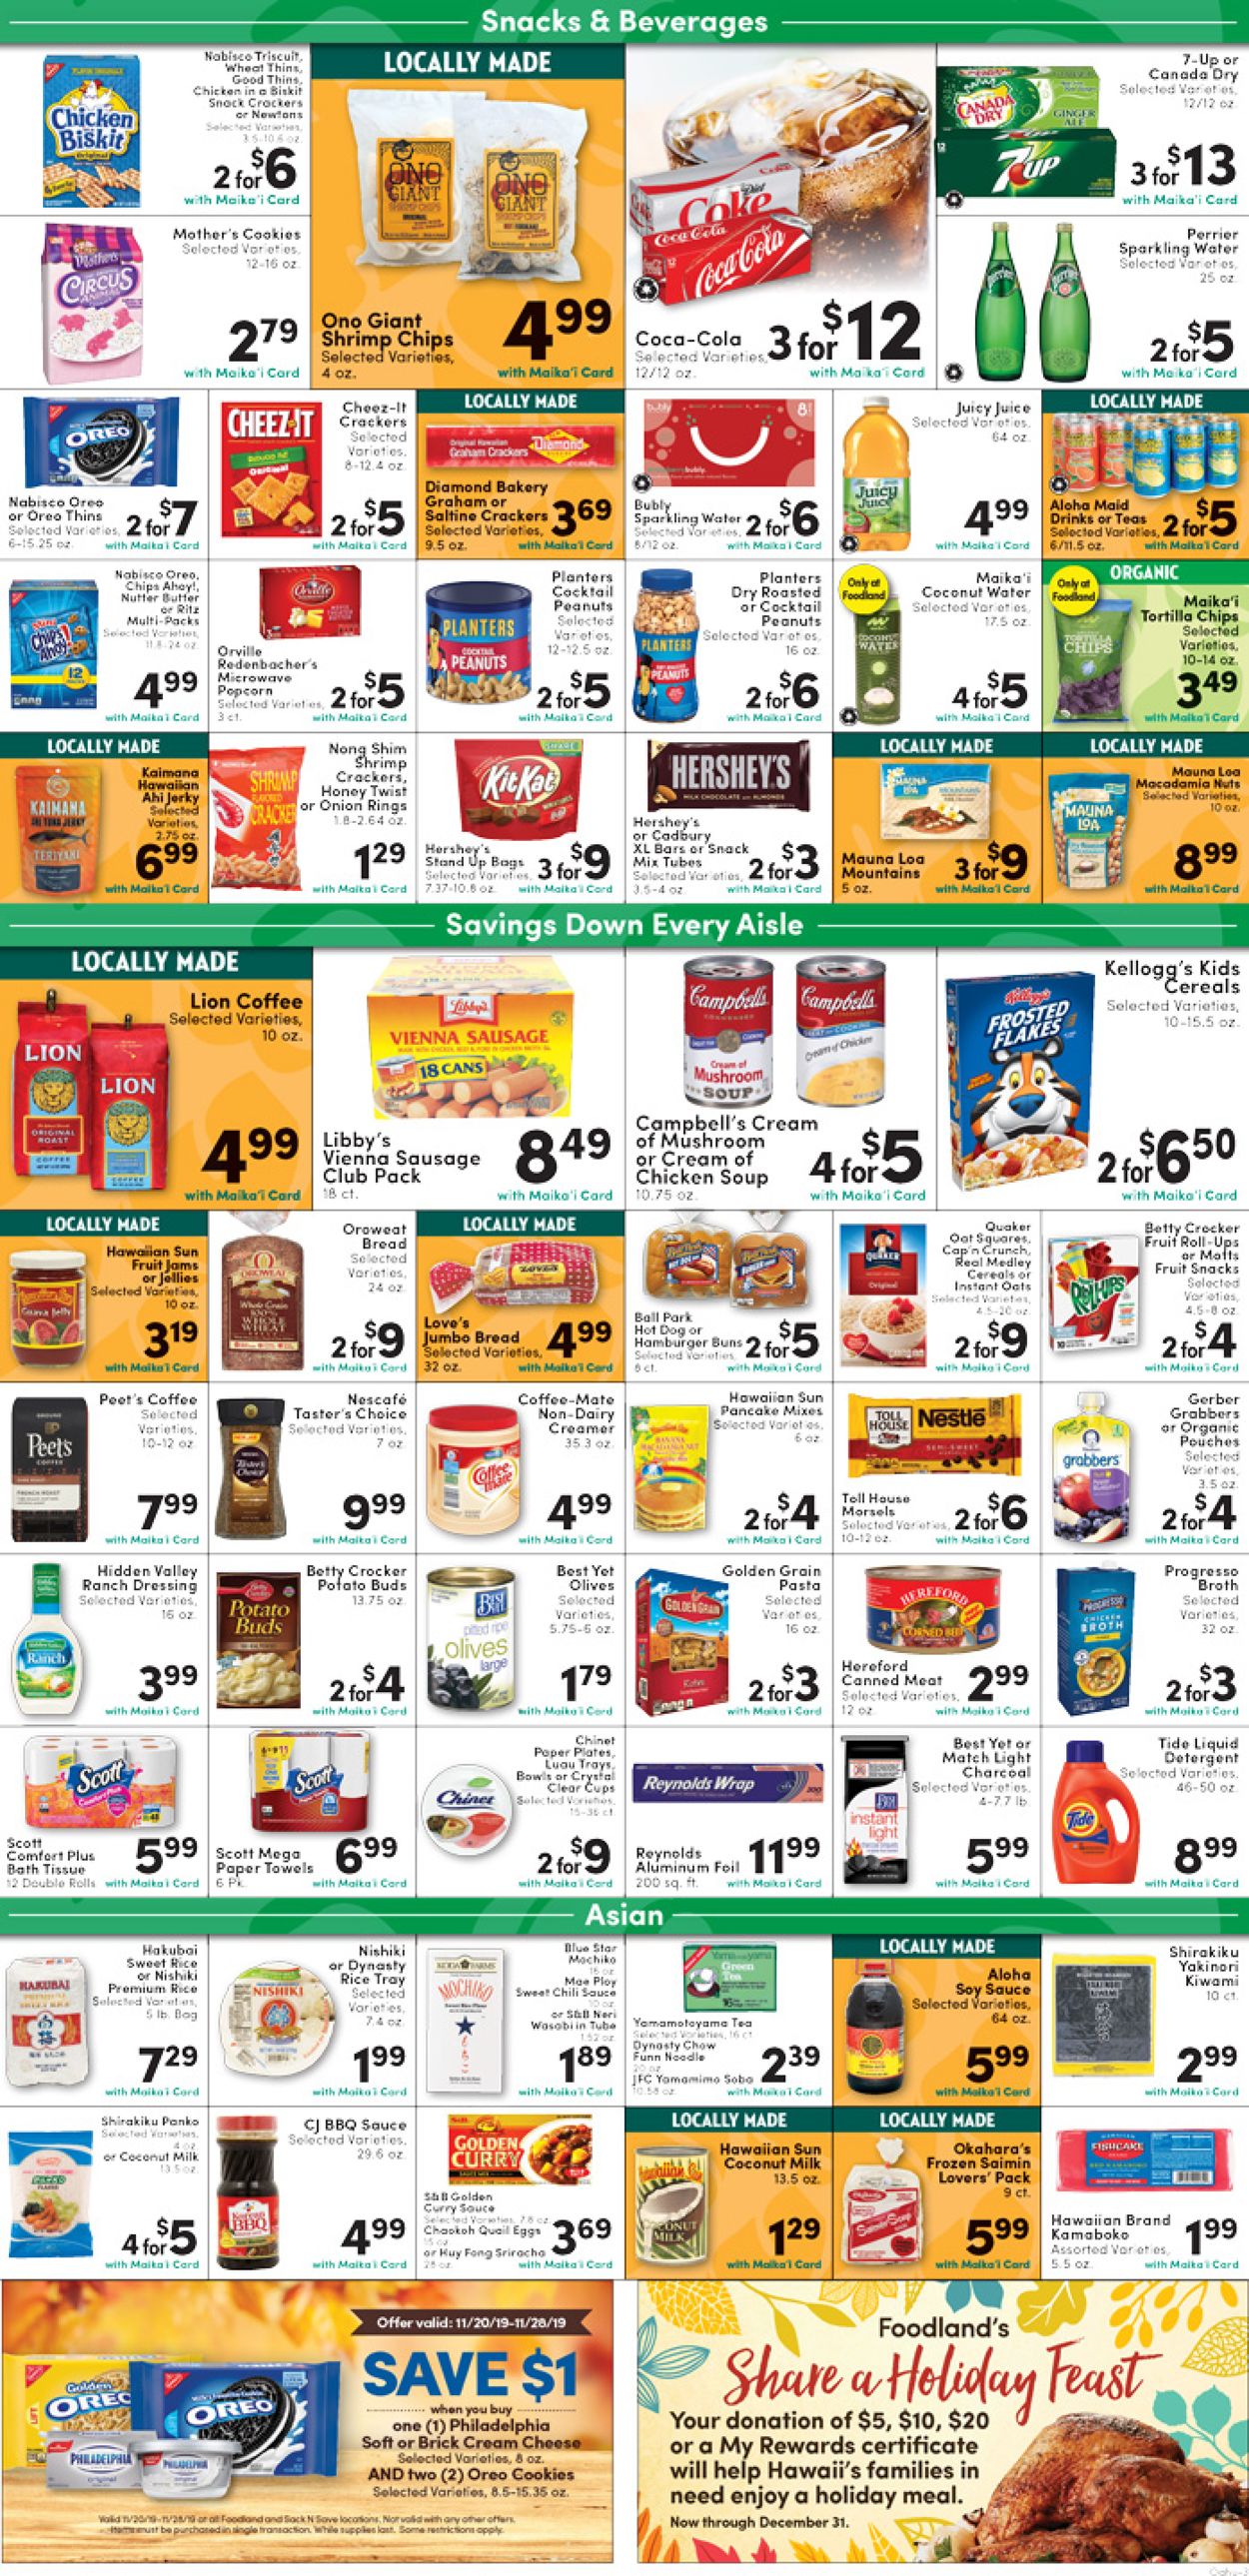 Foodland Current weekly ad 11/20 - 11/28/2019 [5] - frequent-ads.com